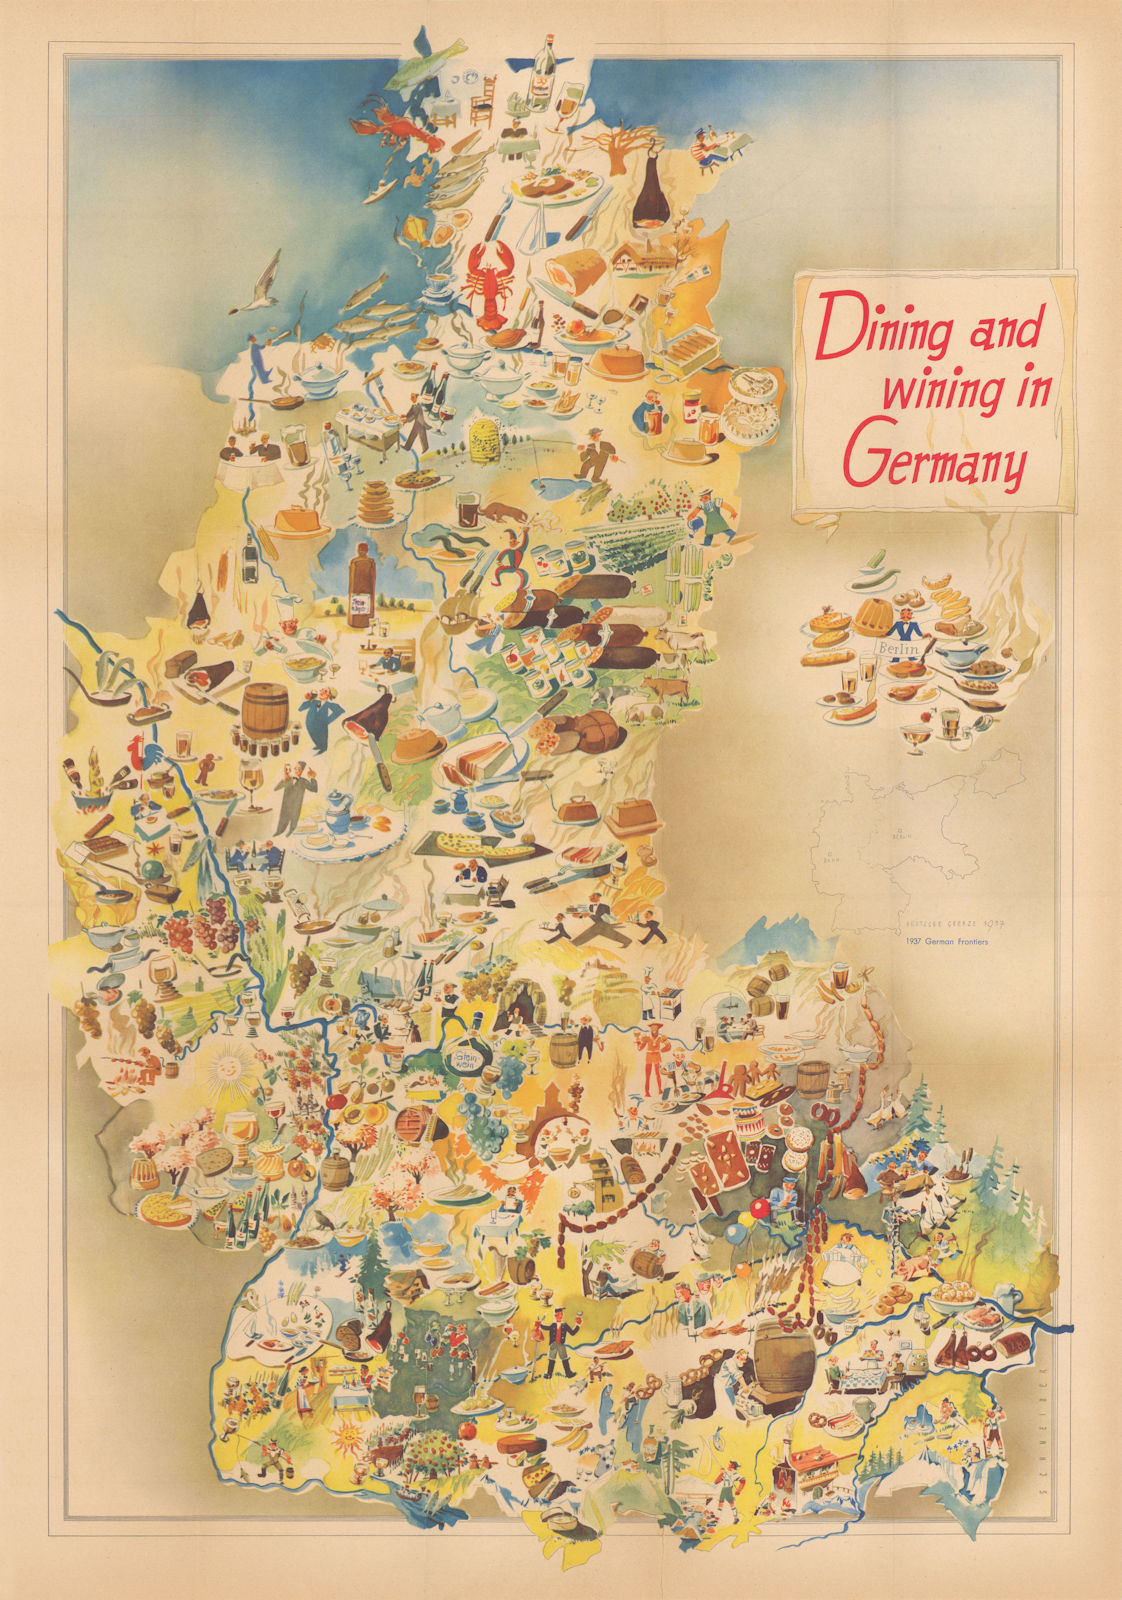 Associate Product Dining & Wining in Germany. Gastronomic tourist pictorial poster map 1953